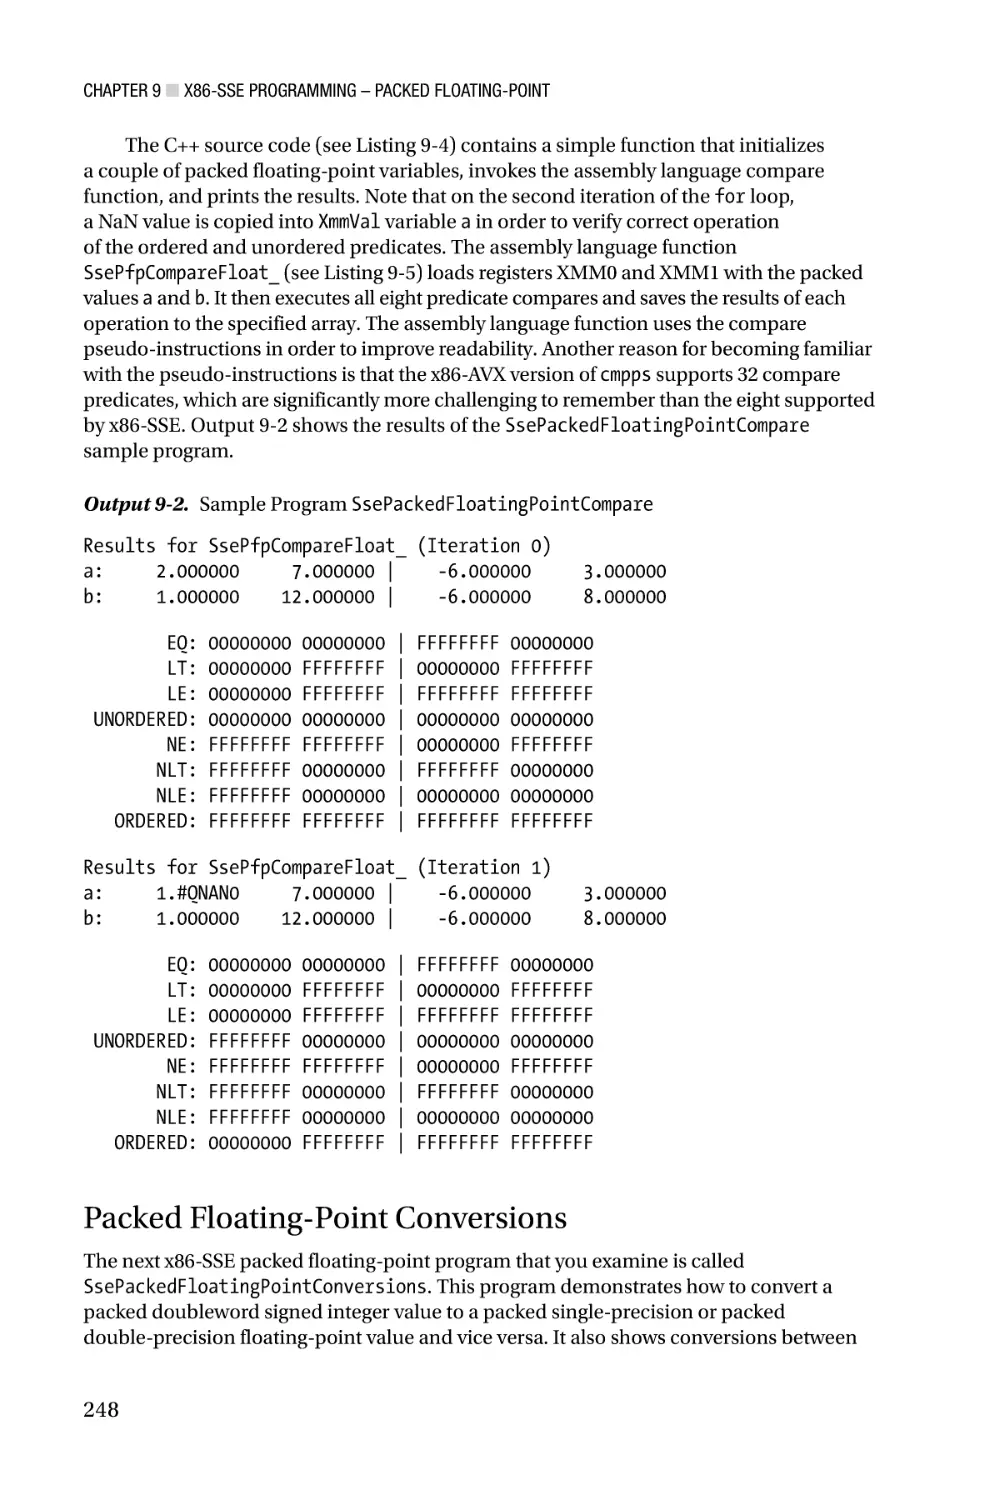 Packed Floating-Point Conversions